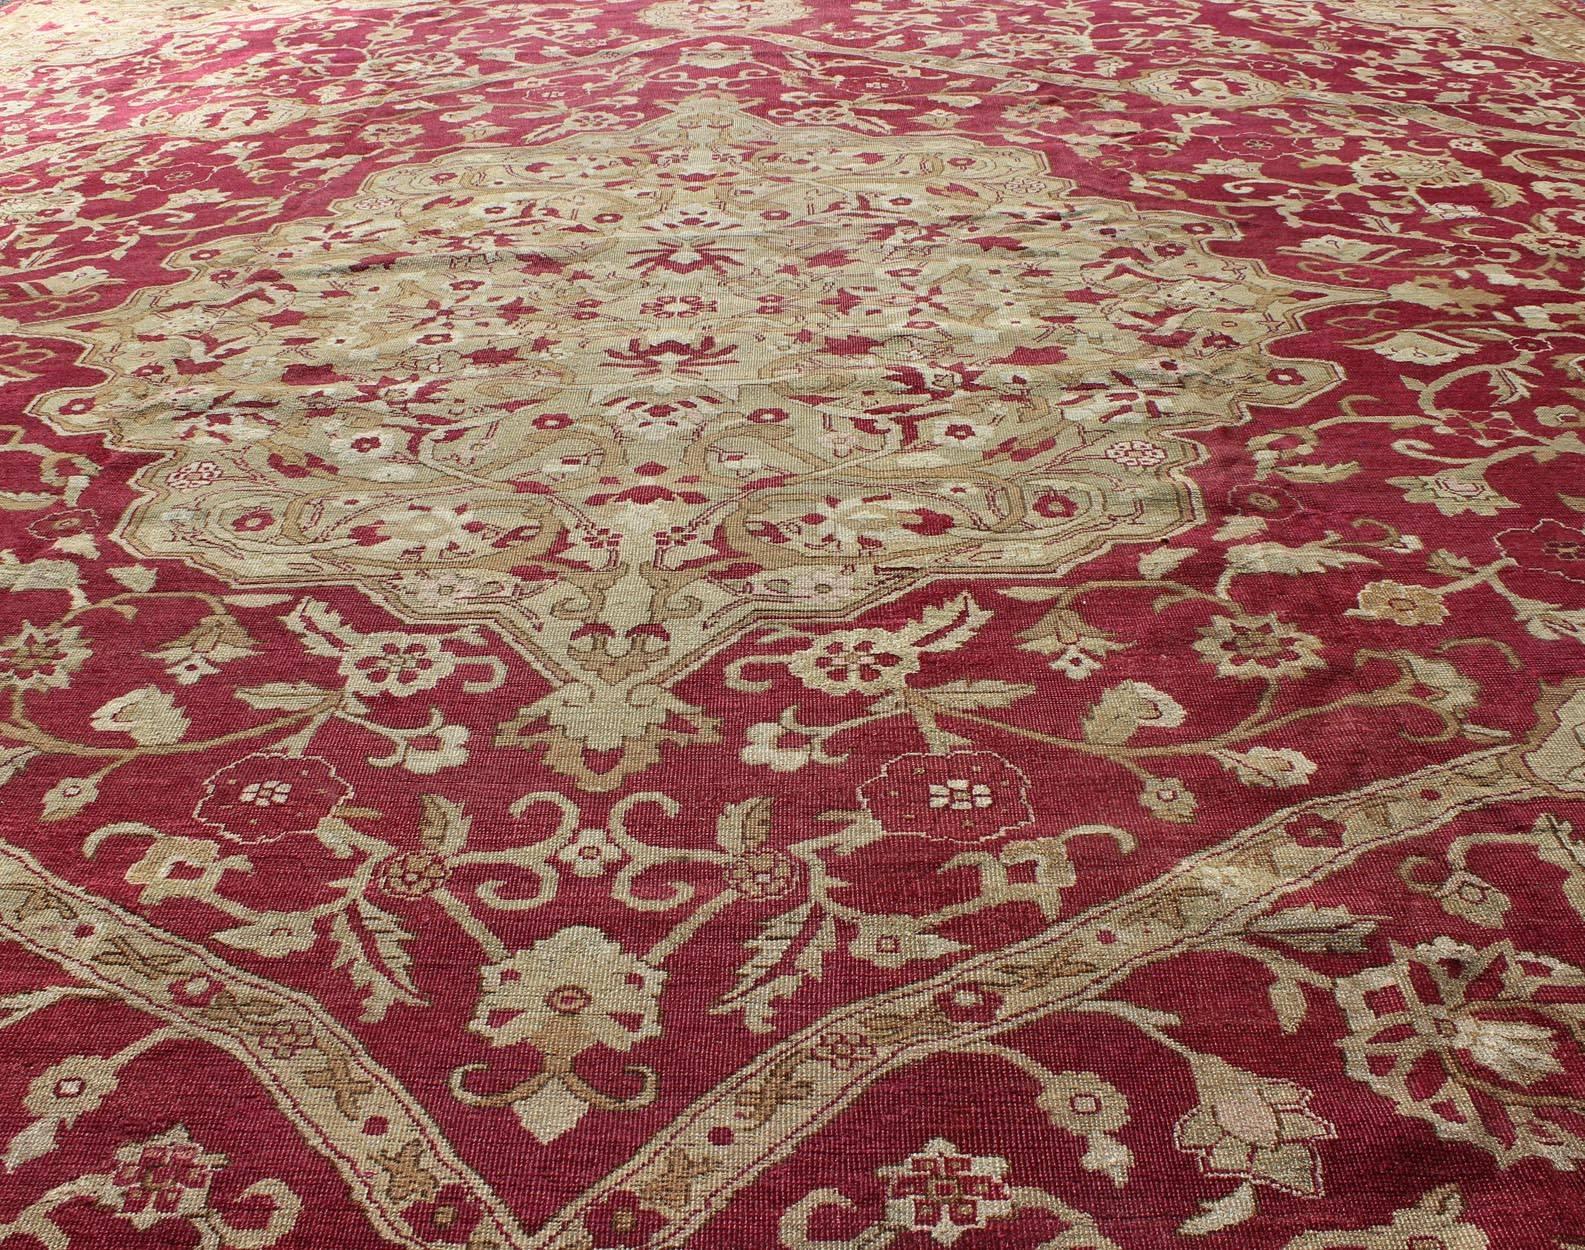 Late 19th Century Large Antique Agra Carpet with Floral Design in Red, Taupe and Light Green 